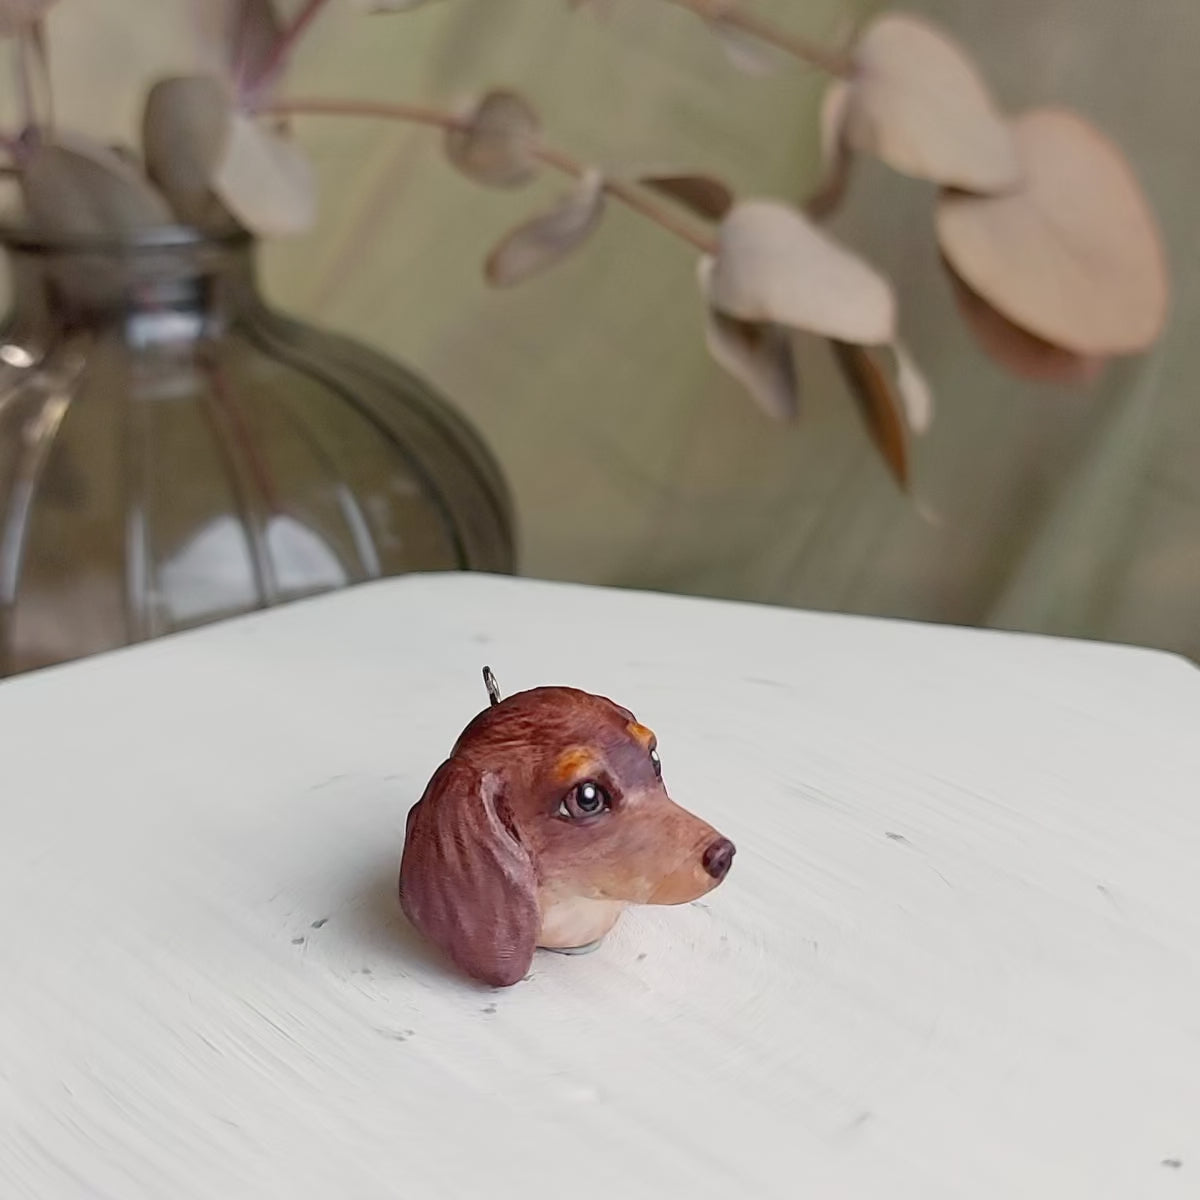 Dachshund shaded red pendant turntable